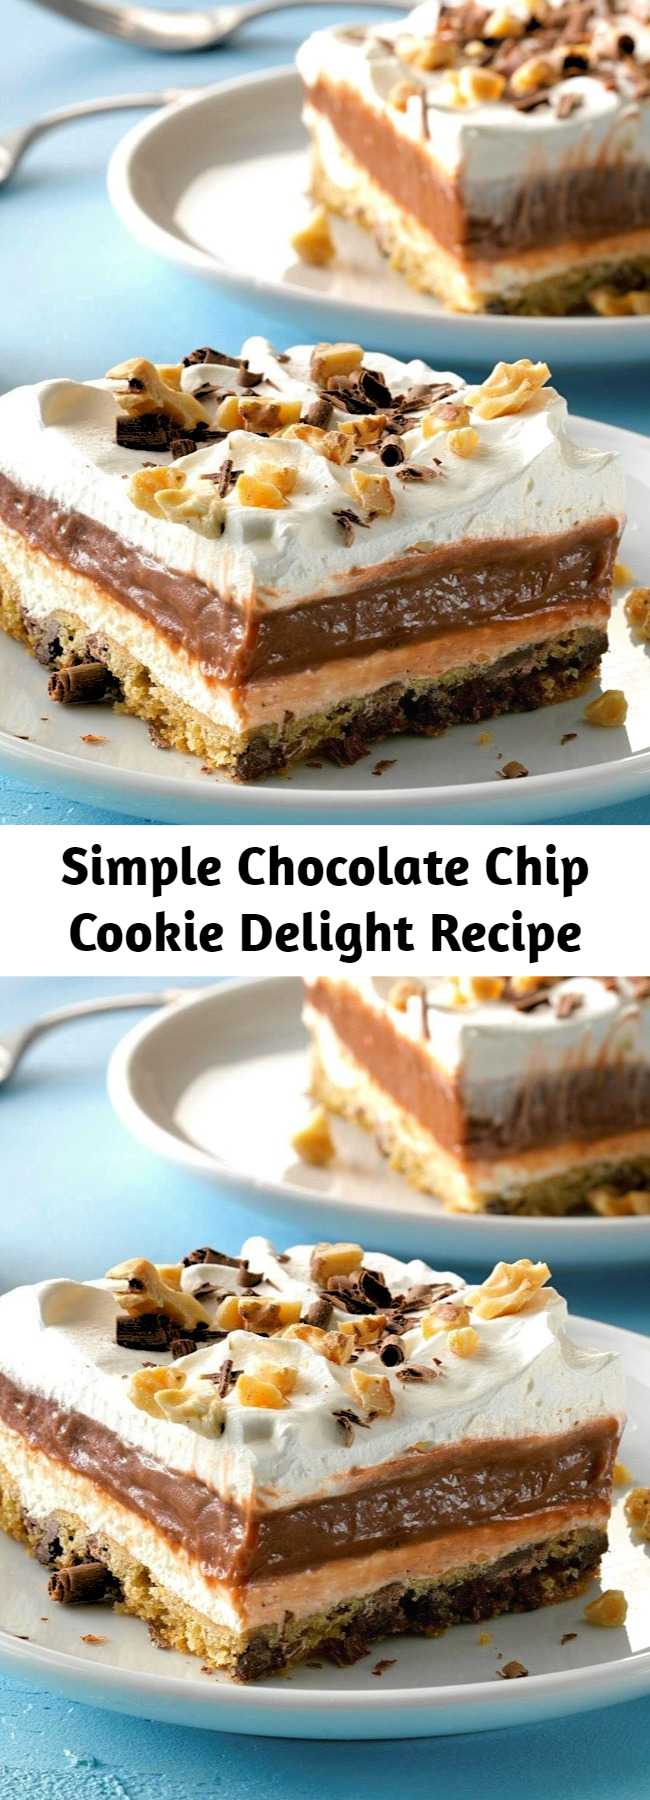 Simple Chocolate Chip Cookie Delight Recipe - Simple Chocolate Chip Cookie Delight Recipe - This is a simple chocolate delight recipe for any type of potluck occasion, and the pan always comes home empty.